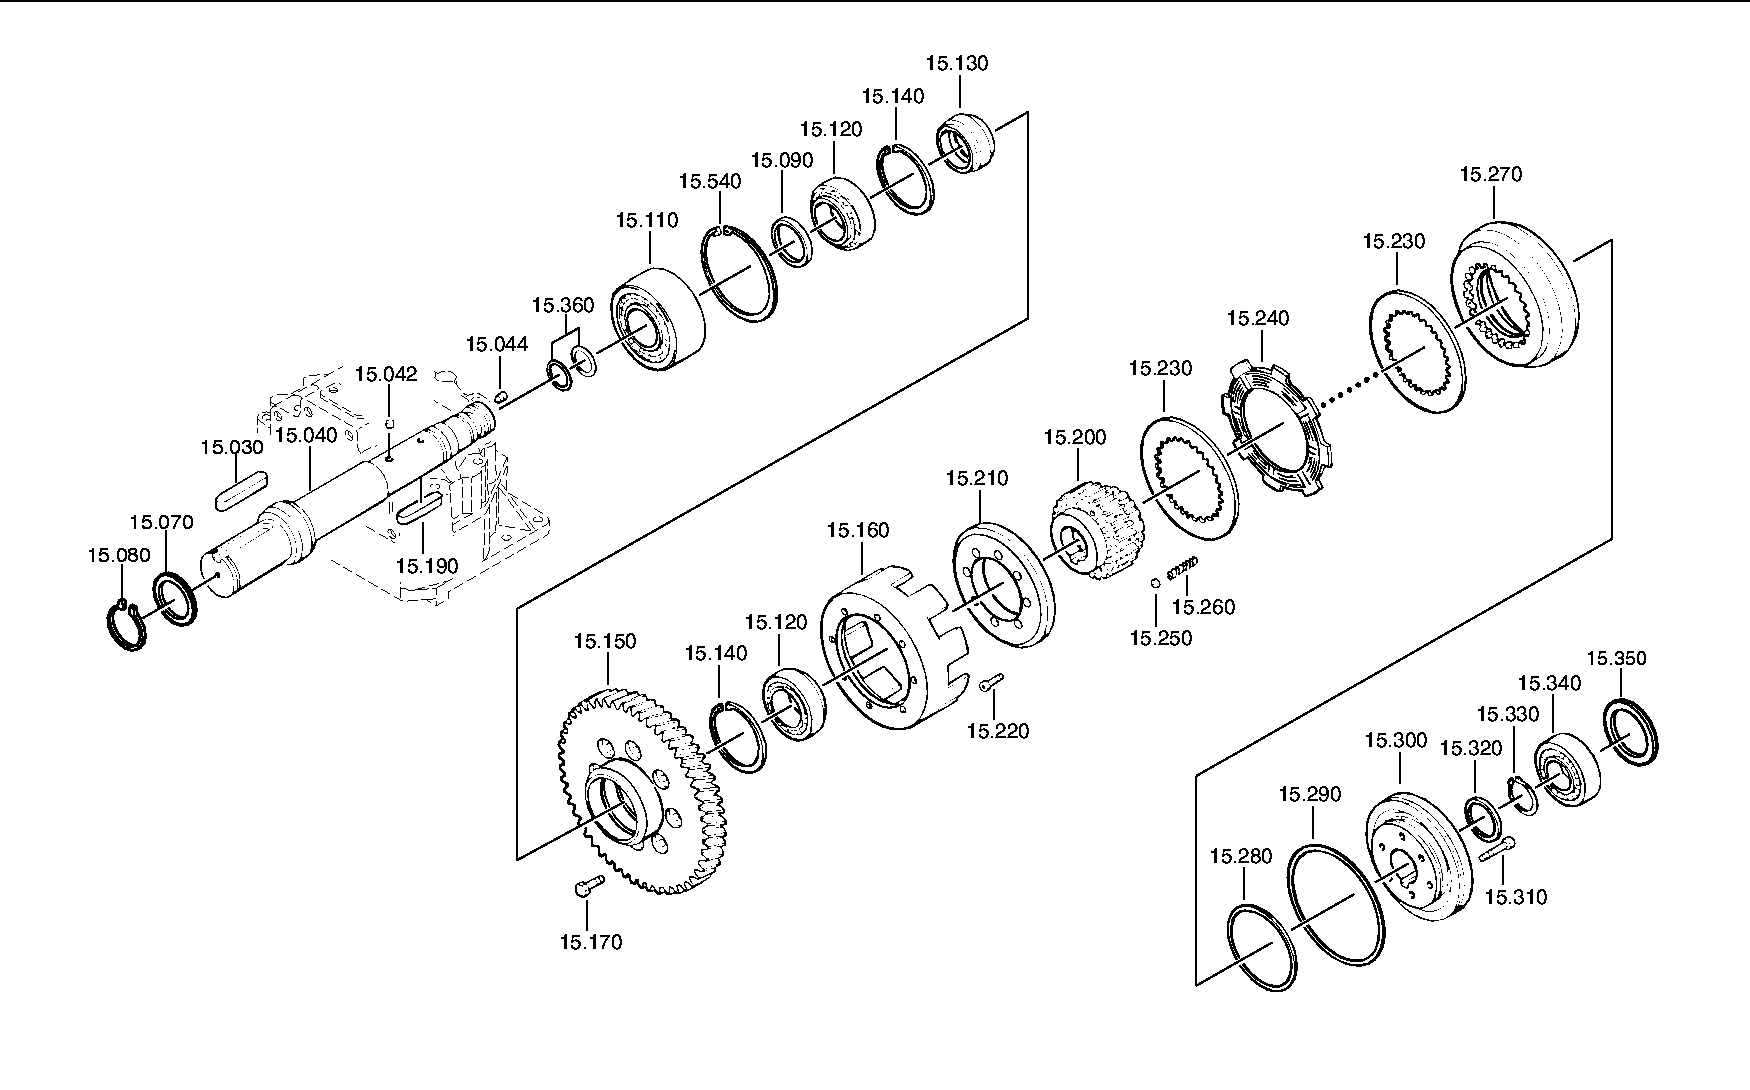 drawing for TEREX EQUIPMENT LIMITED 0012491 - CIRCLIP (figure 4)